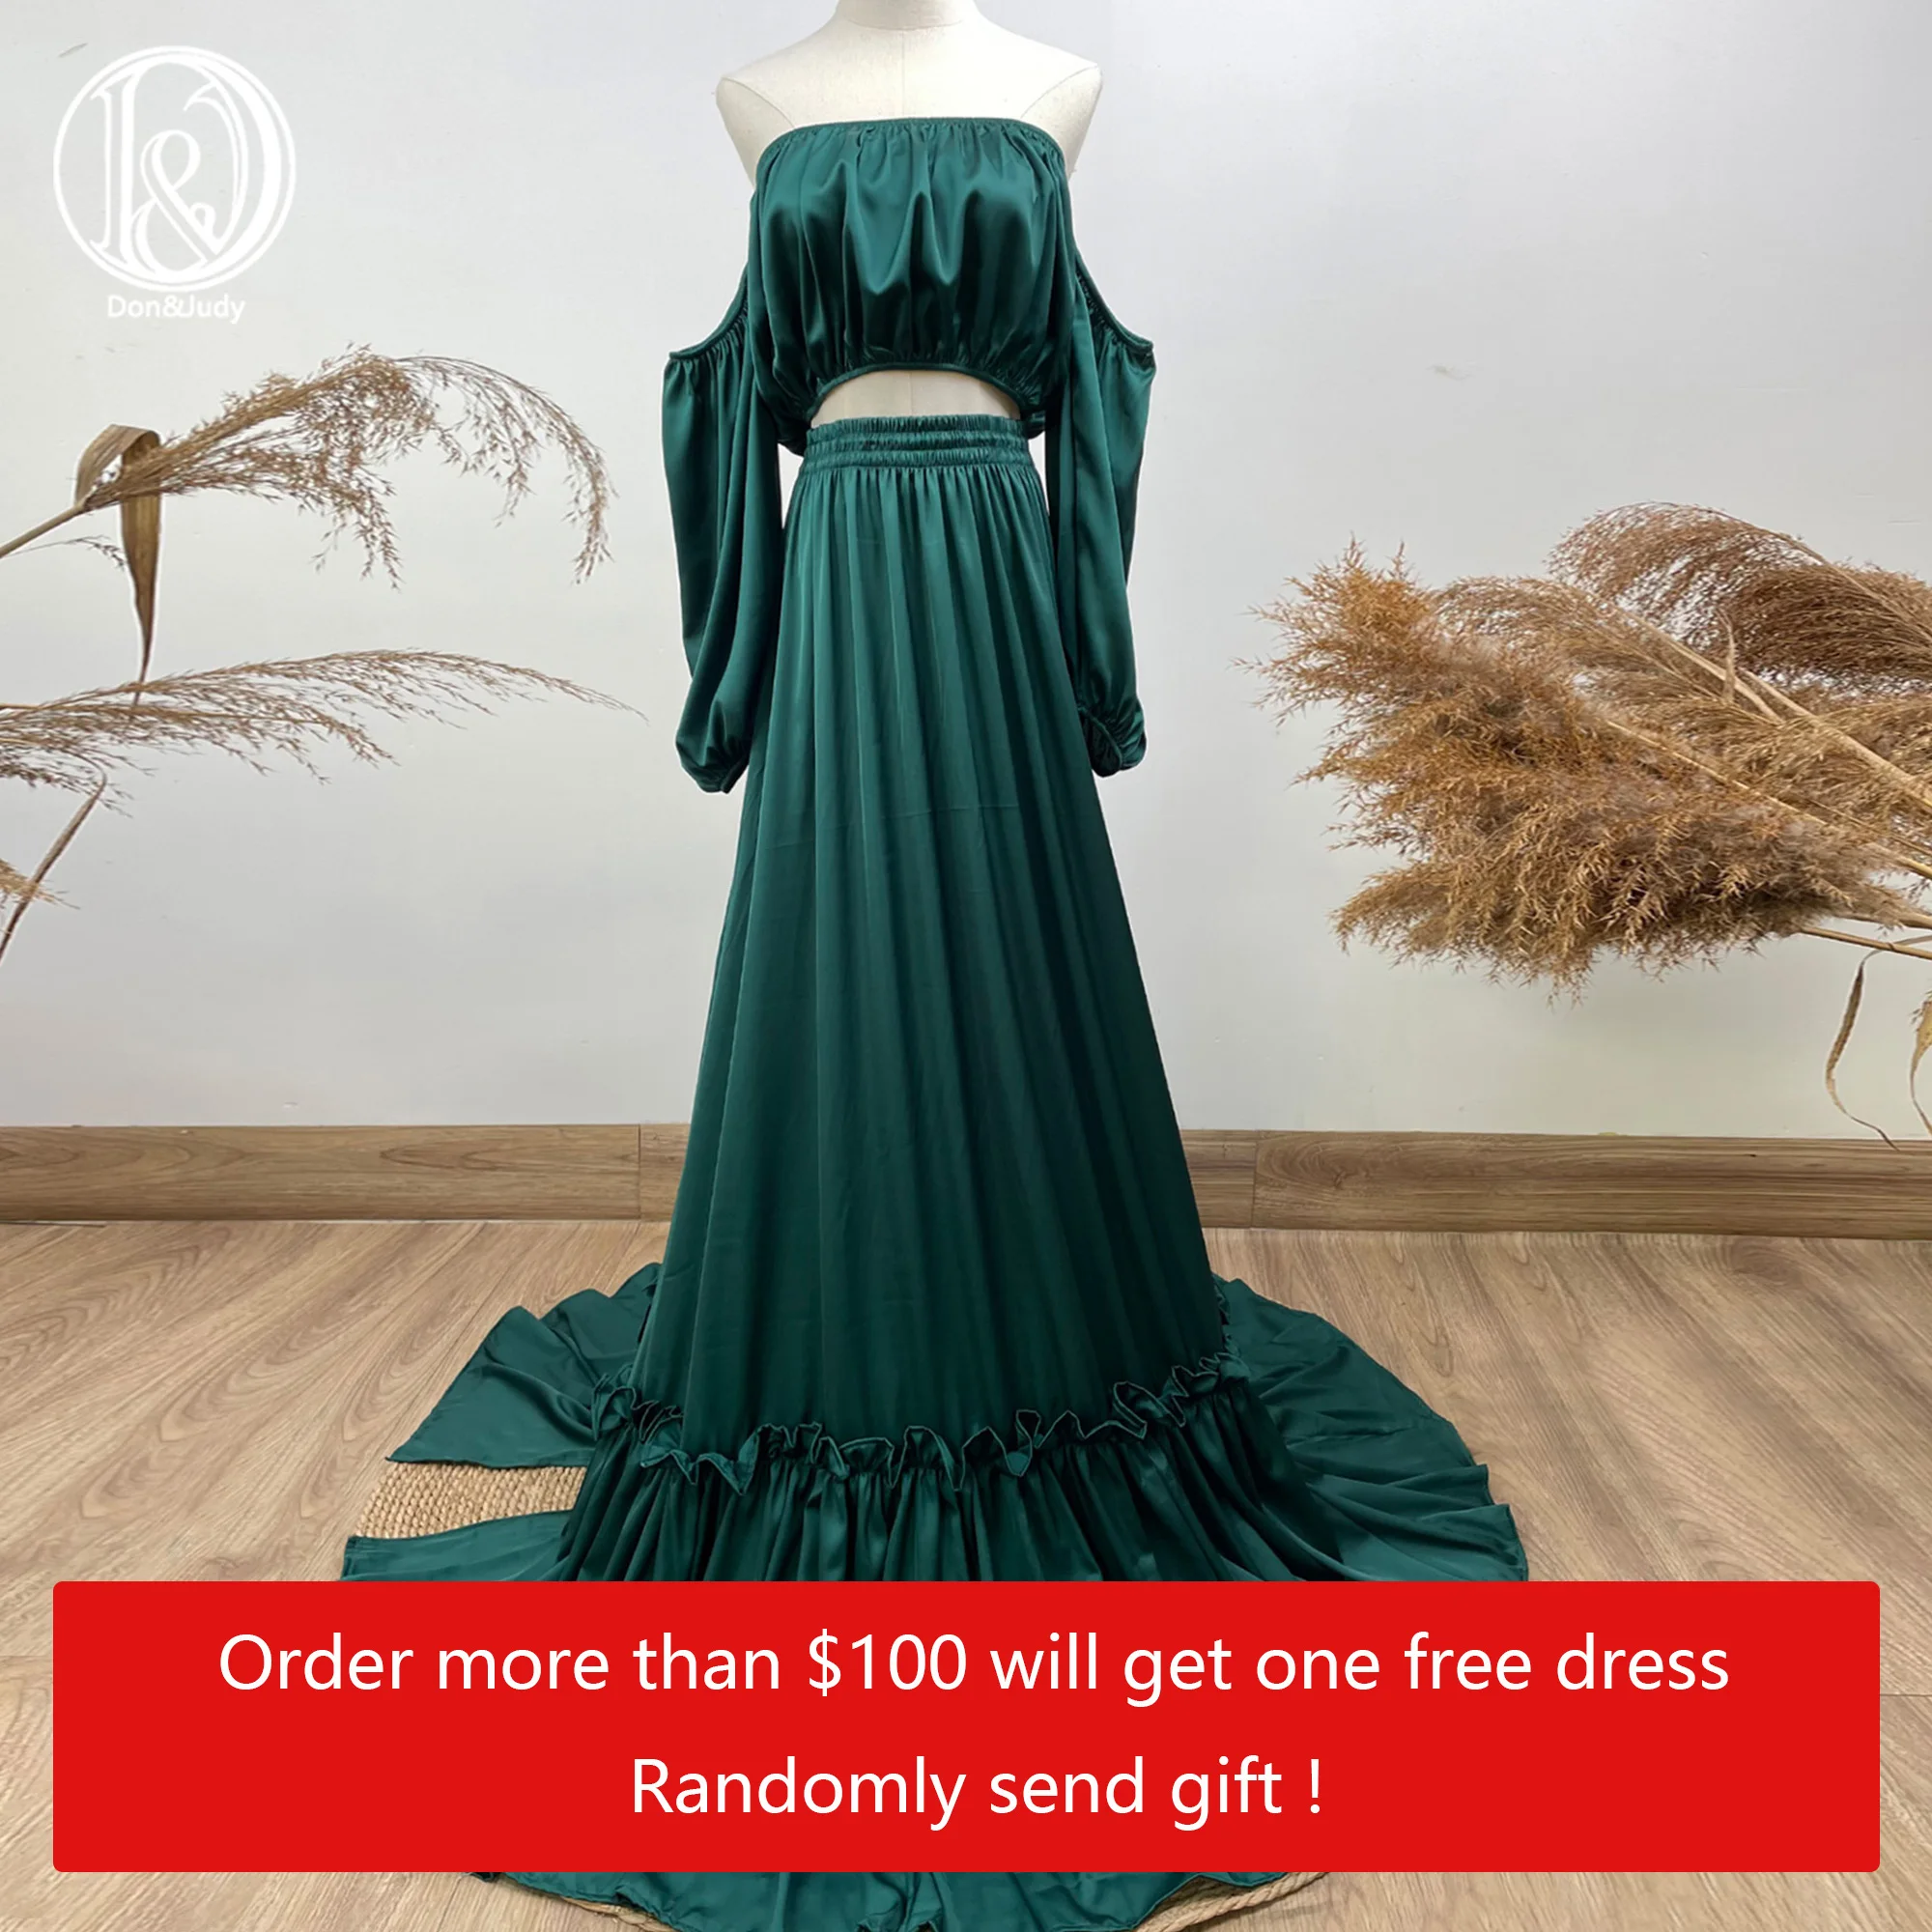 Don&Judy Silky Two Piece Gown Maternity Or Non-maternity Dresses Boob Bube Top Long Skirt Christmas Photoshoot Photography Props